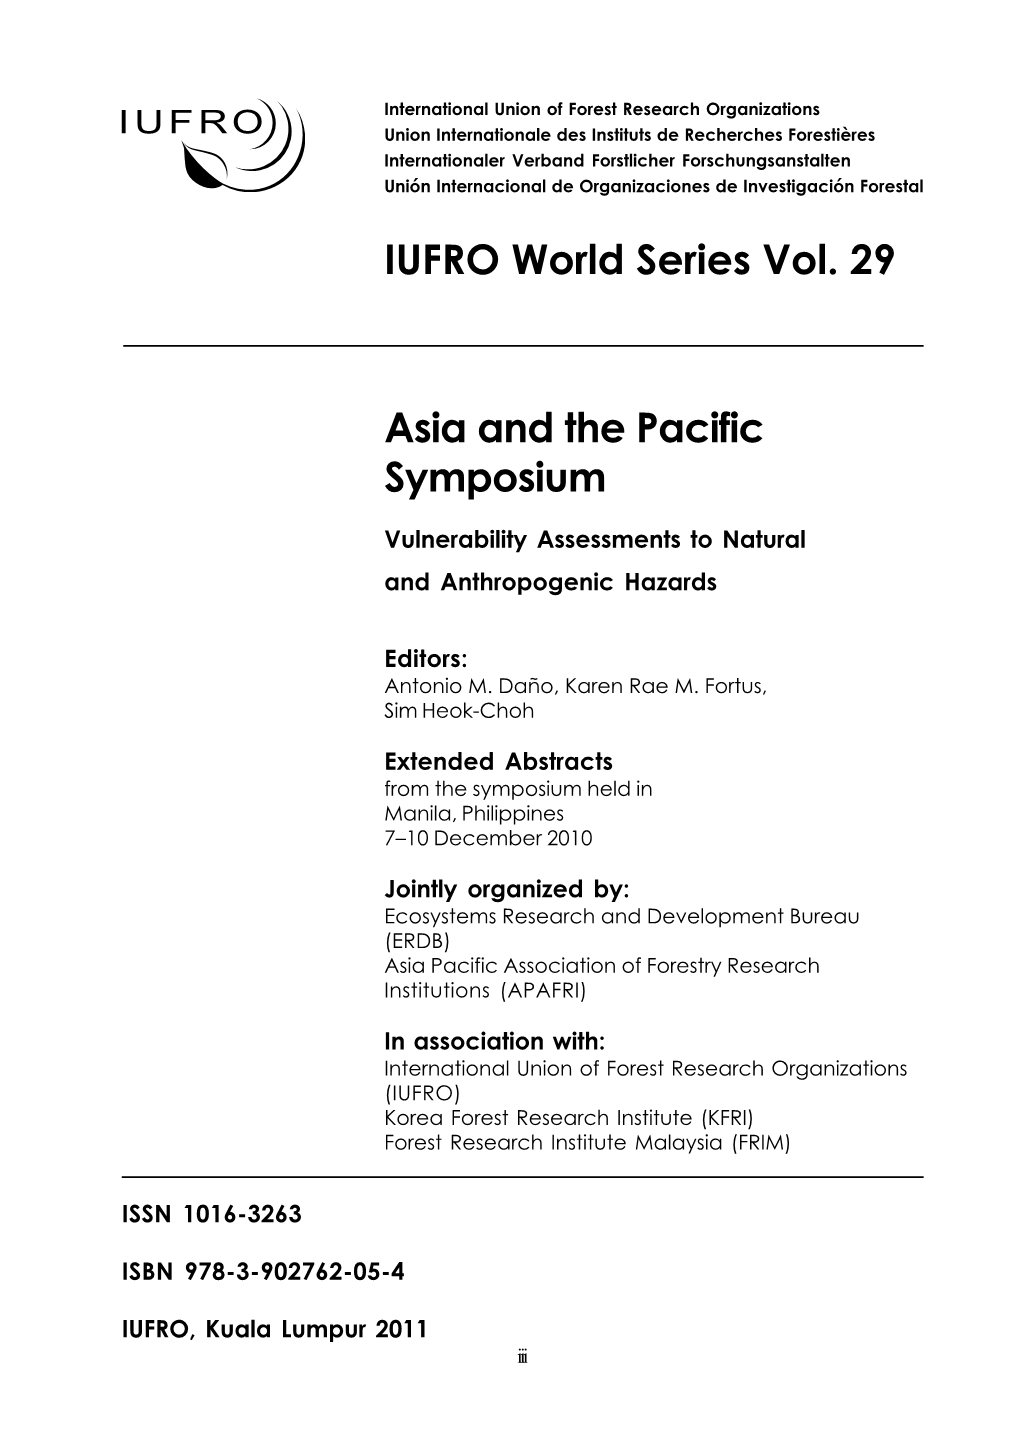 IUFRO World Series Vol. 29 Asia and the Pacific Symposium